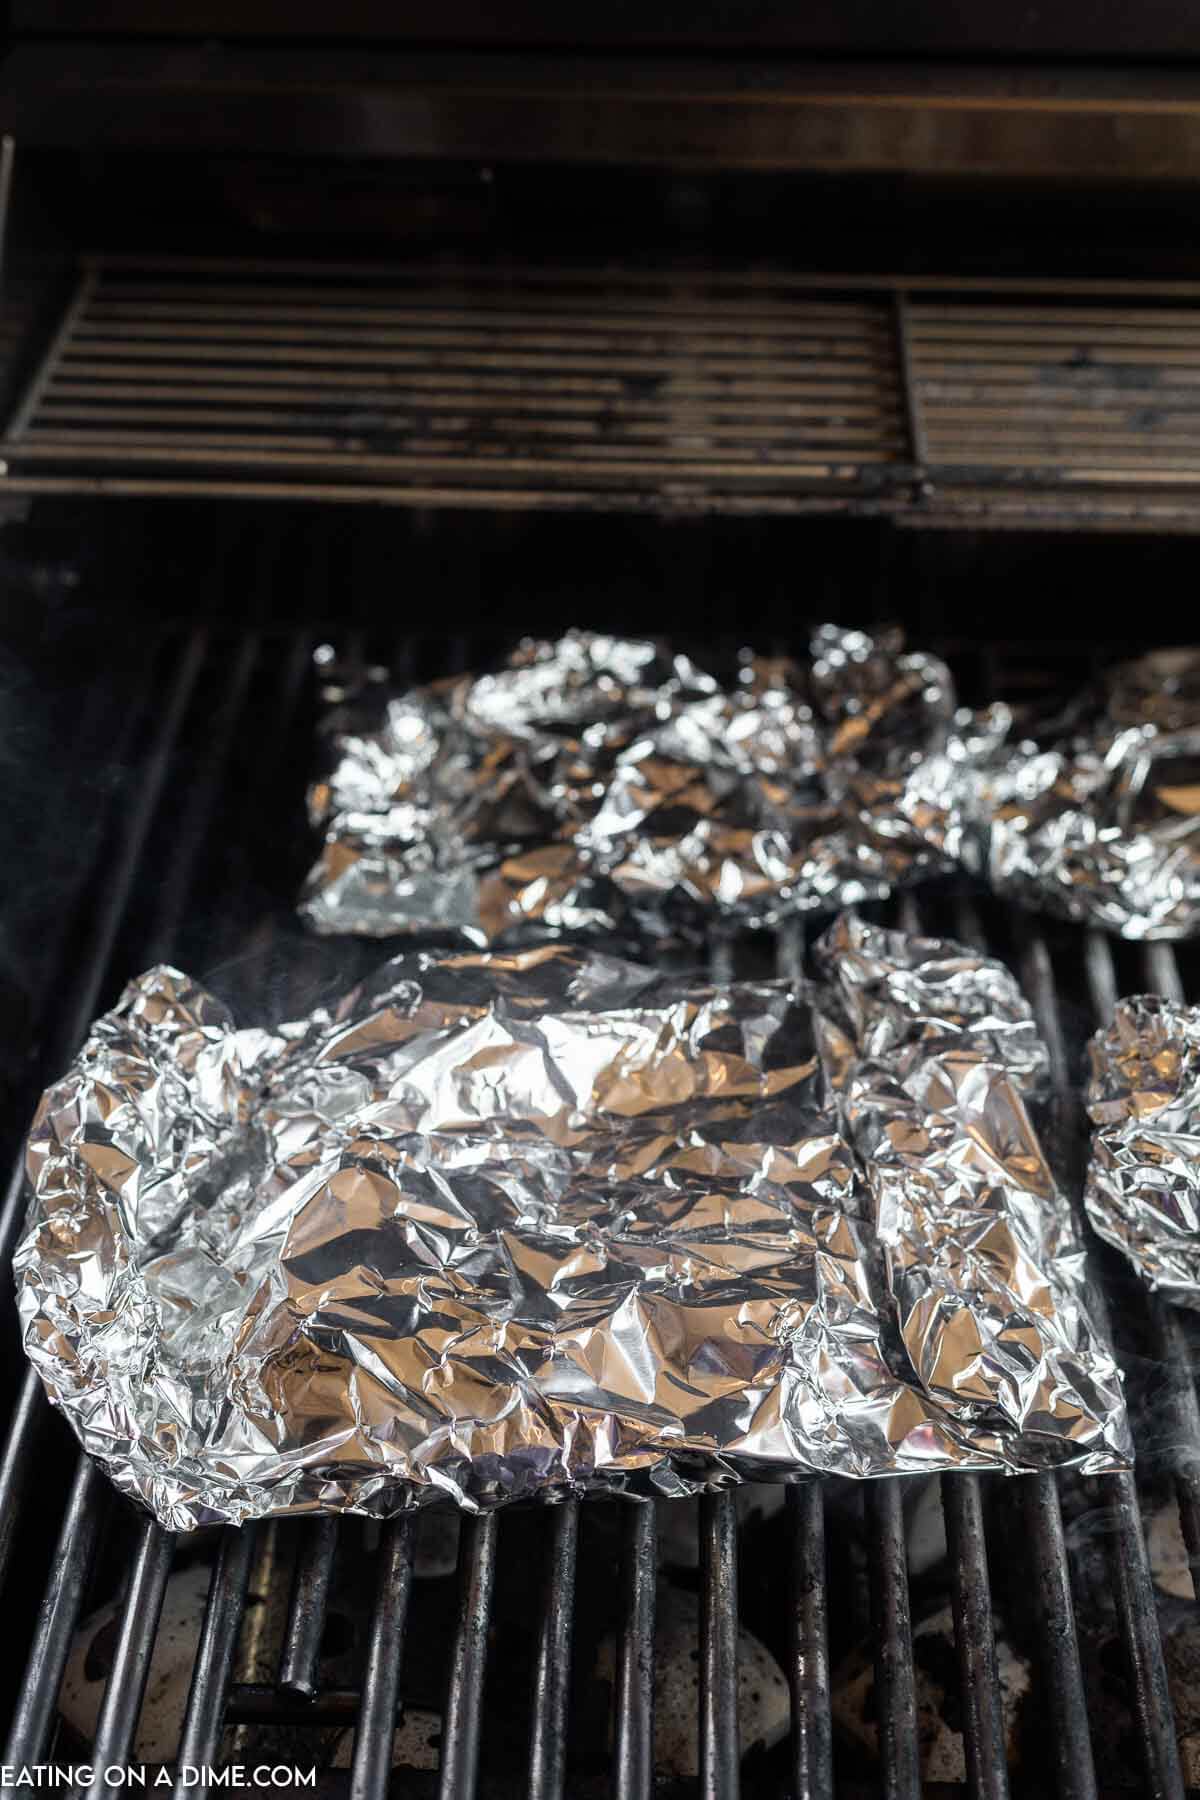 Placed crack chicken foil packs on the grill grates